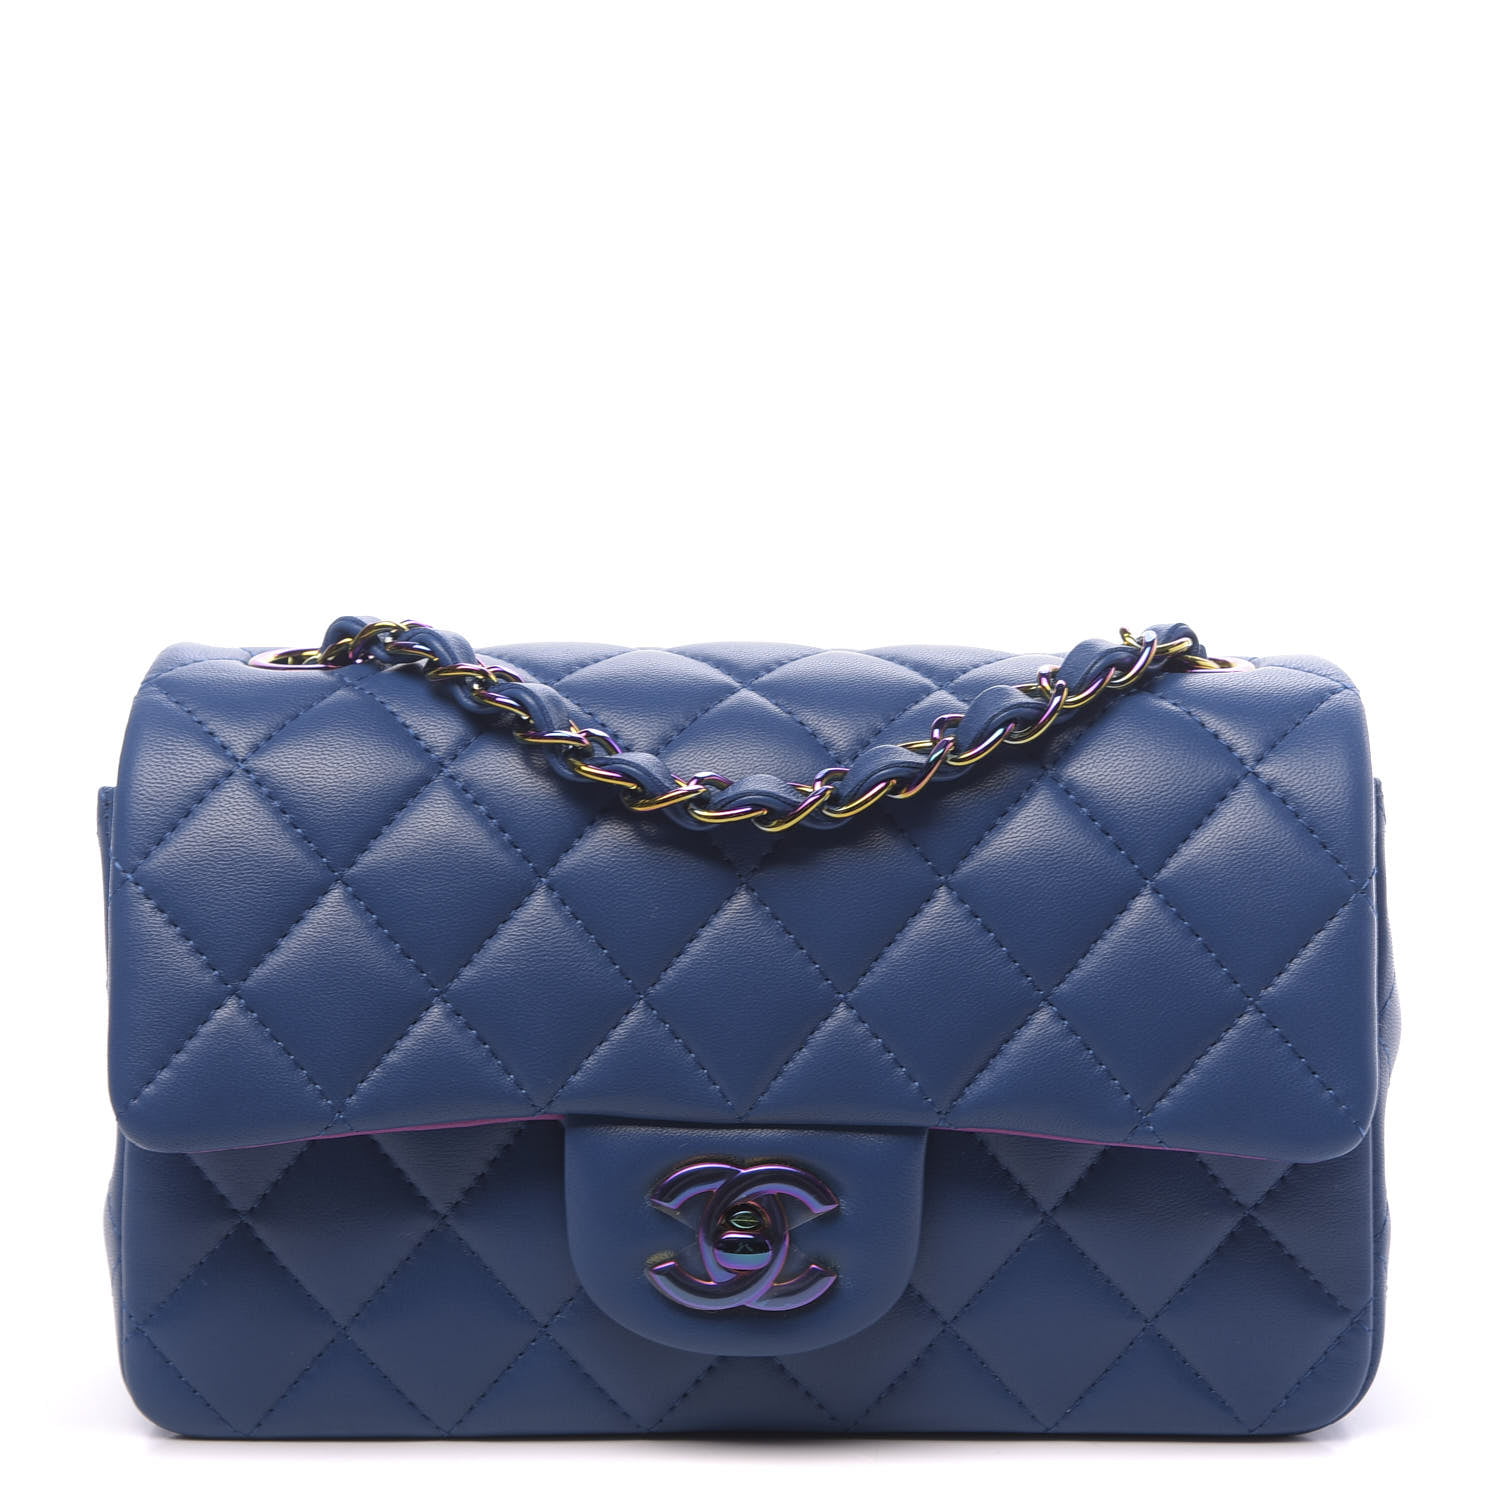 USA Chanel Price Increase 2020: Here are New Prices - PurseBop